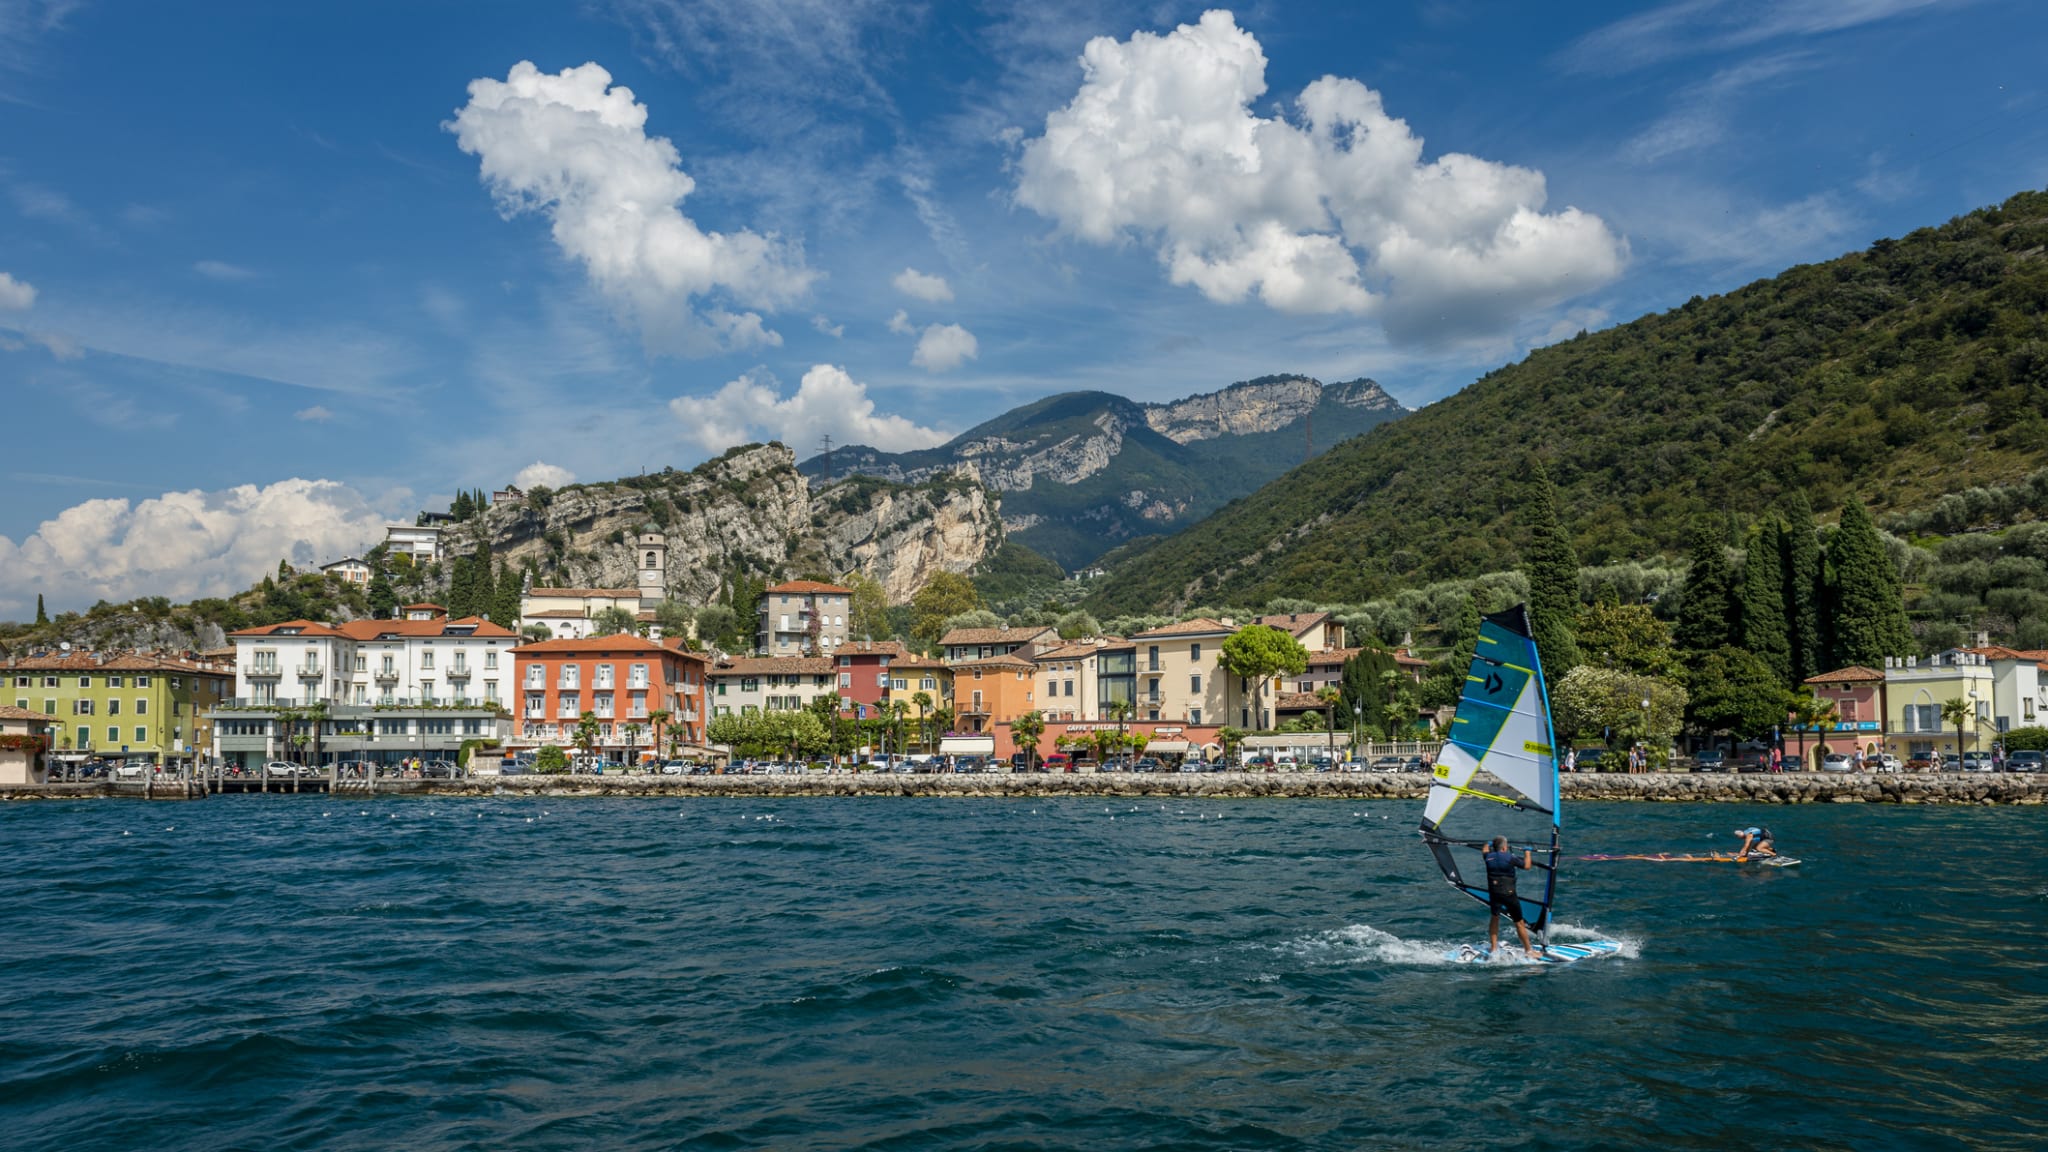 Windsurfer in Torbole am Gardasee in Italien © iStock.com/no_limit_pictures